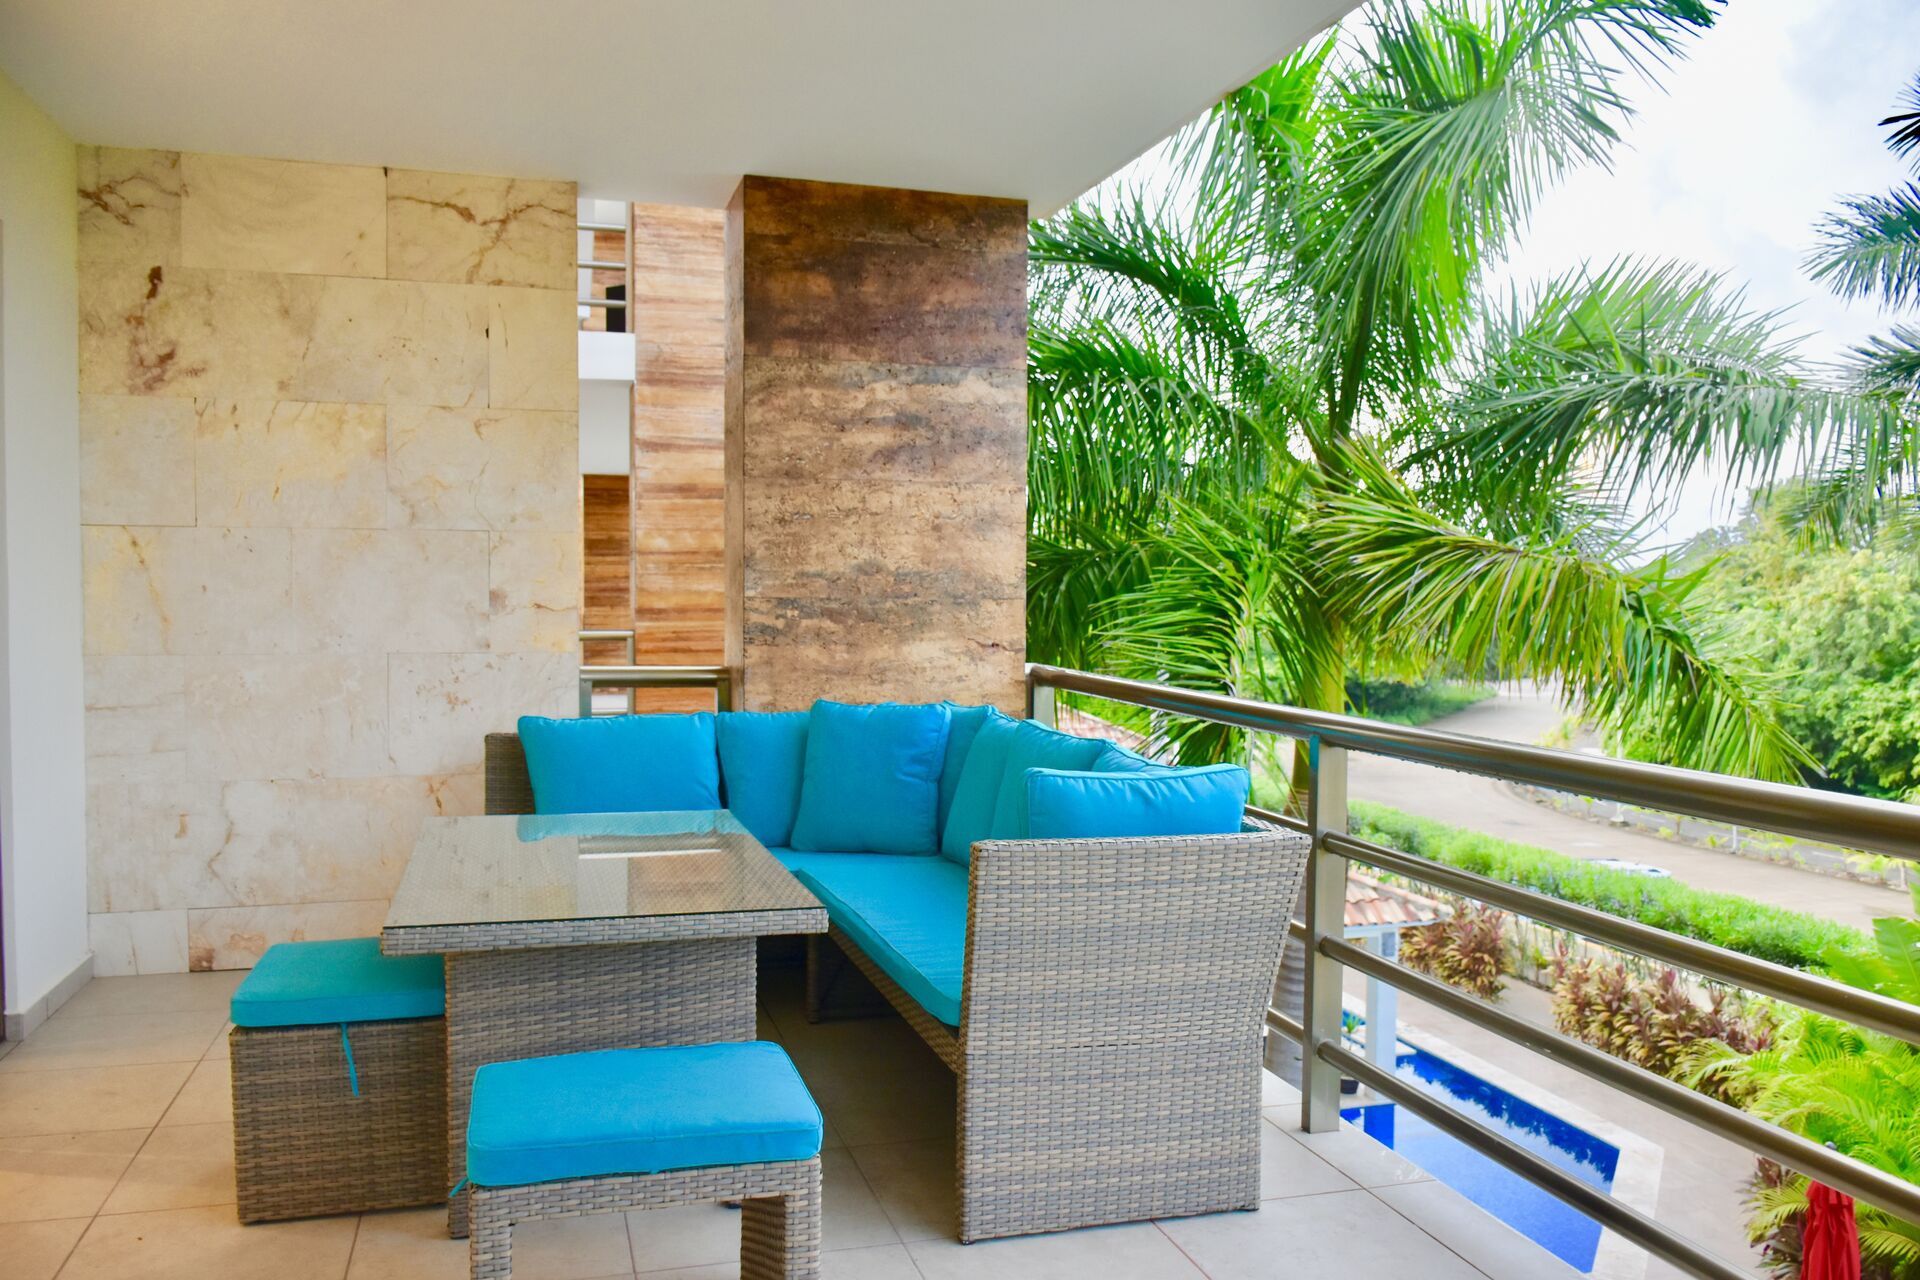 Balcony with beautiful outdoor furniture